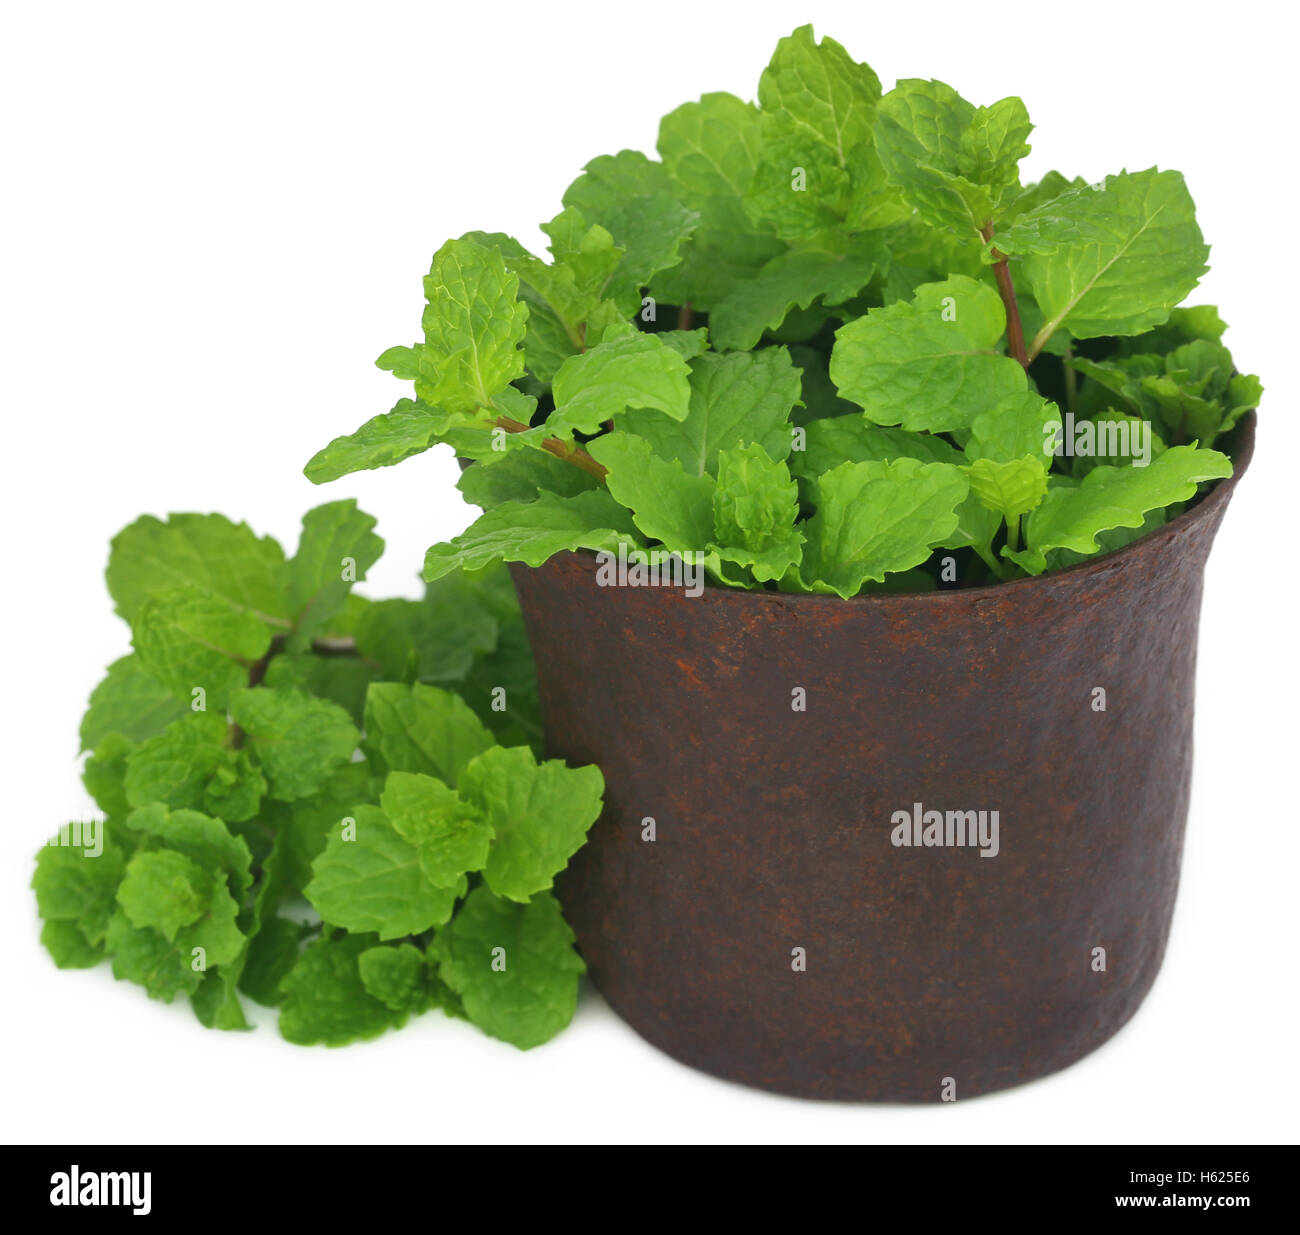 Bunch of mint leaves in a mortar over white background Stock Photo